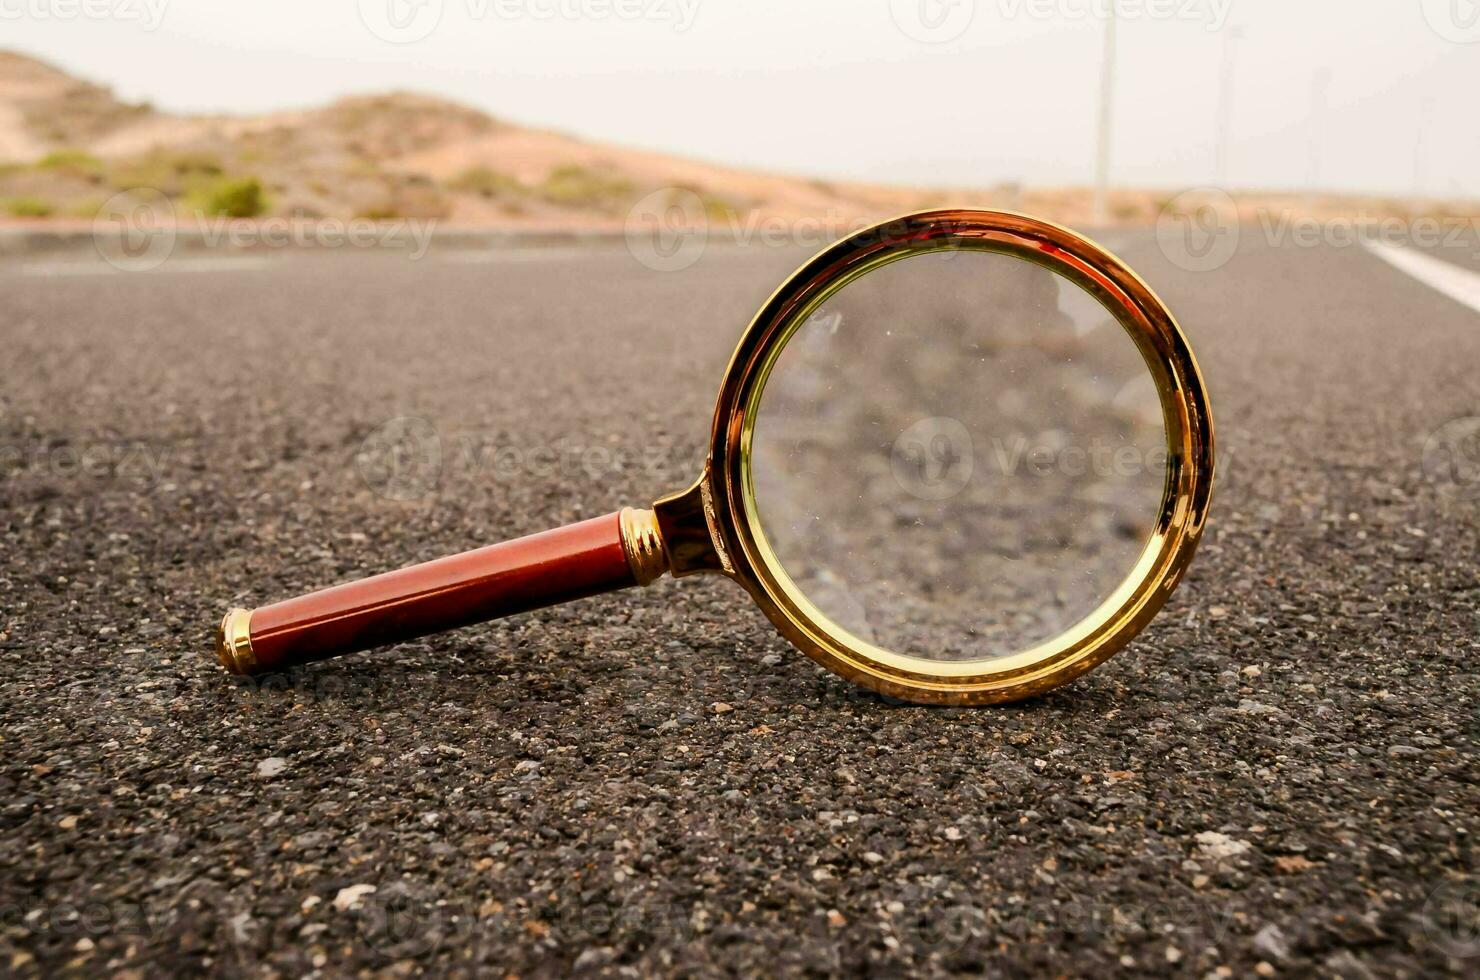 Magnifying glass on the roas photo